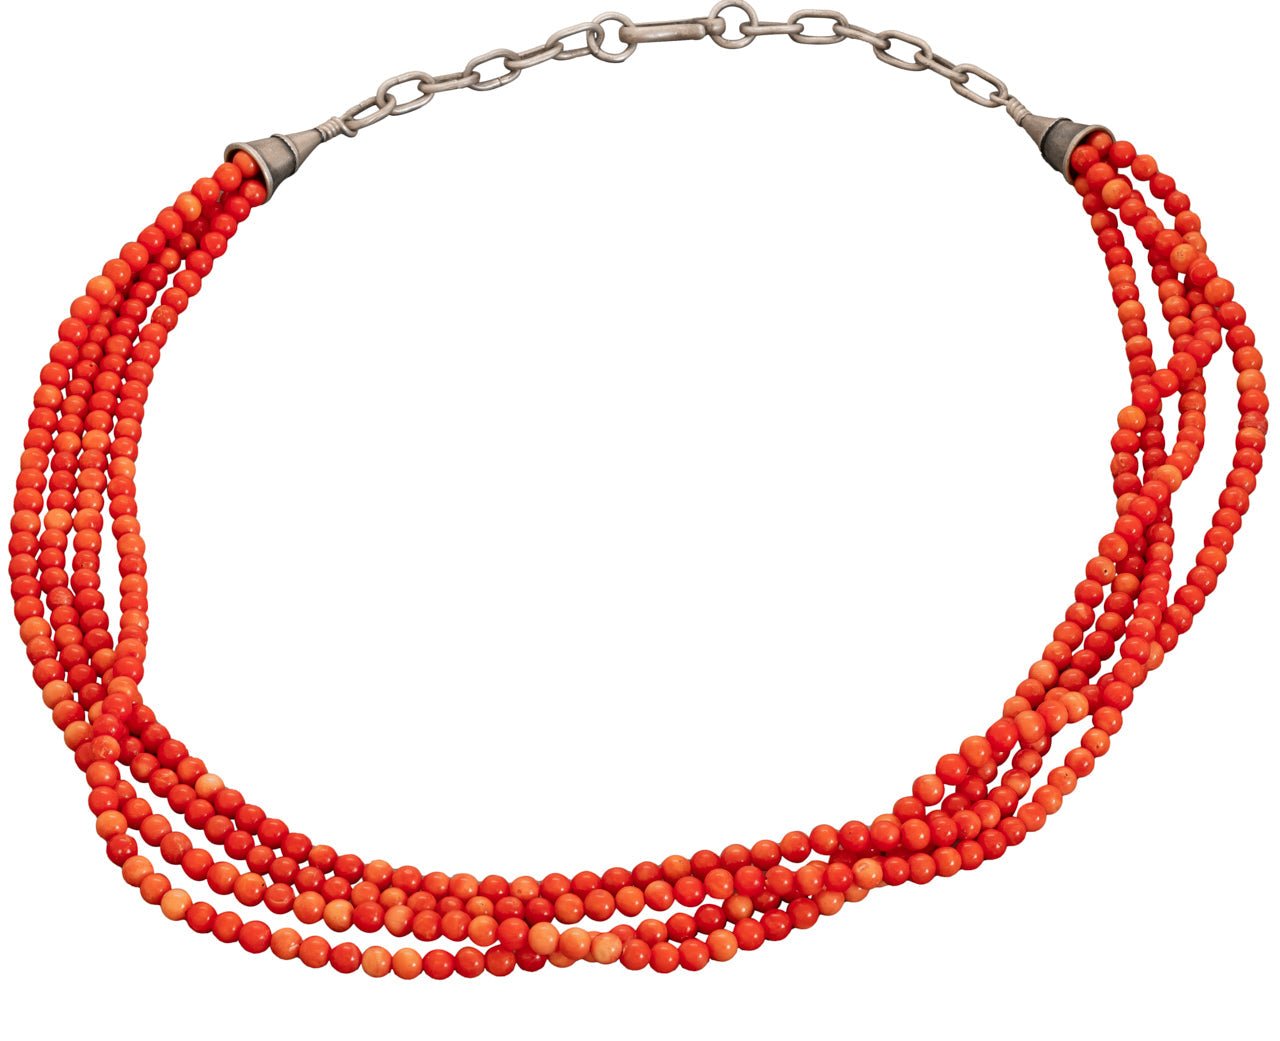 Coral Necklace With Four Strands of Vintage Round Coral Beads - Turquoise & Tufa